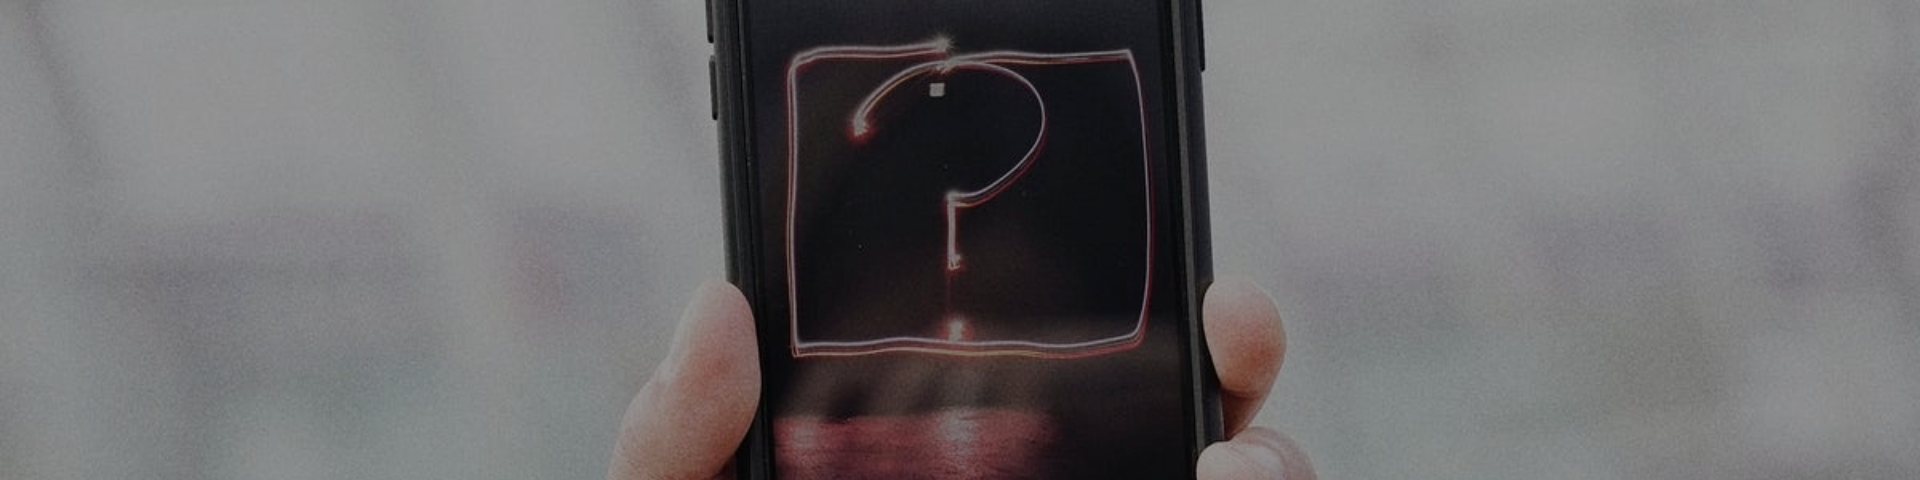 Photo of hand holding phone with question mark on the screen